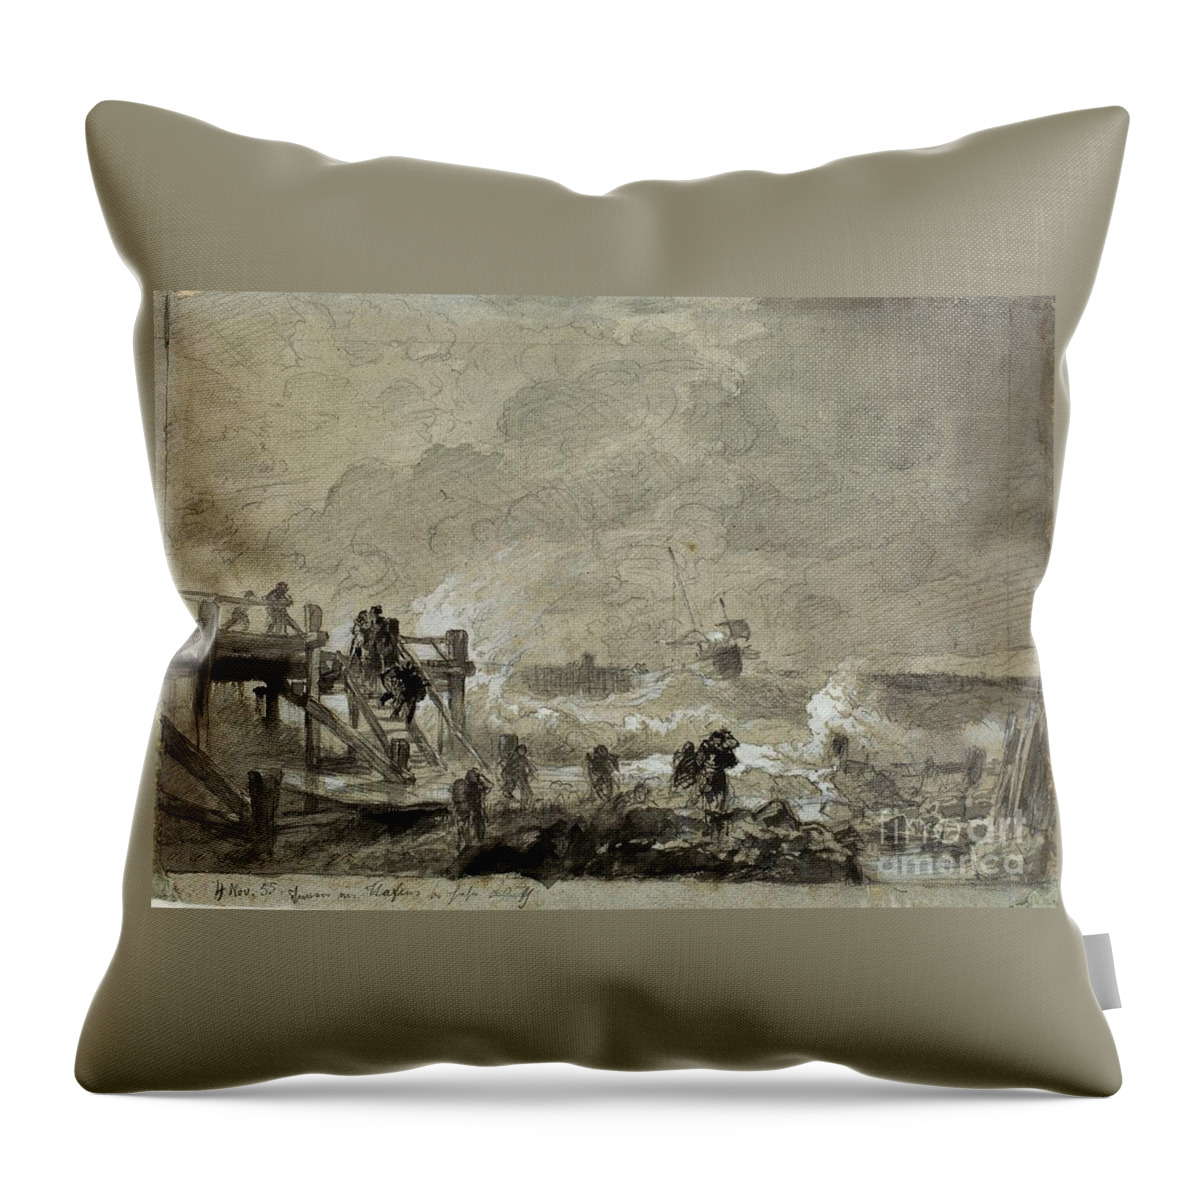 Andreas Achenbach Throw Pillow featuring the painting Sea Landscape With Footbridge by MotionAge Designs